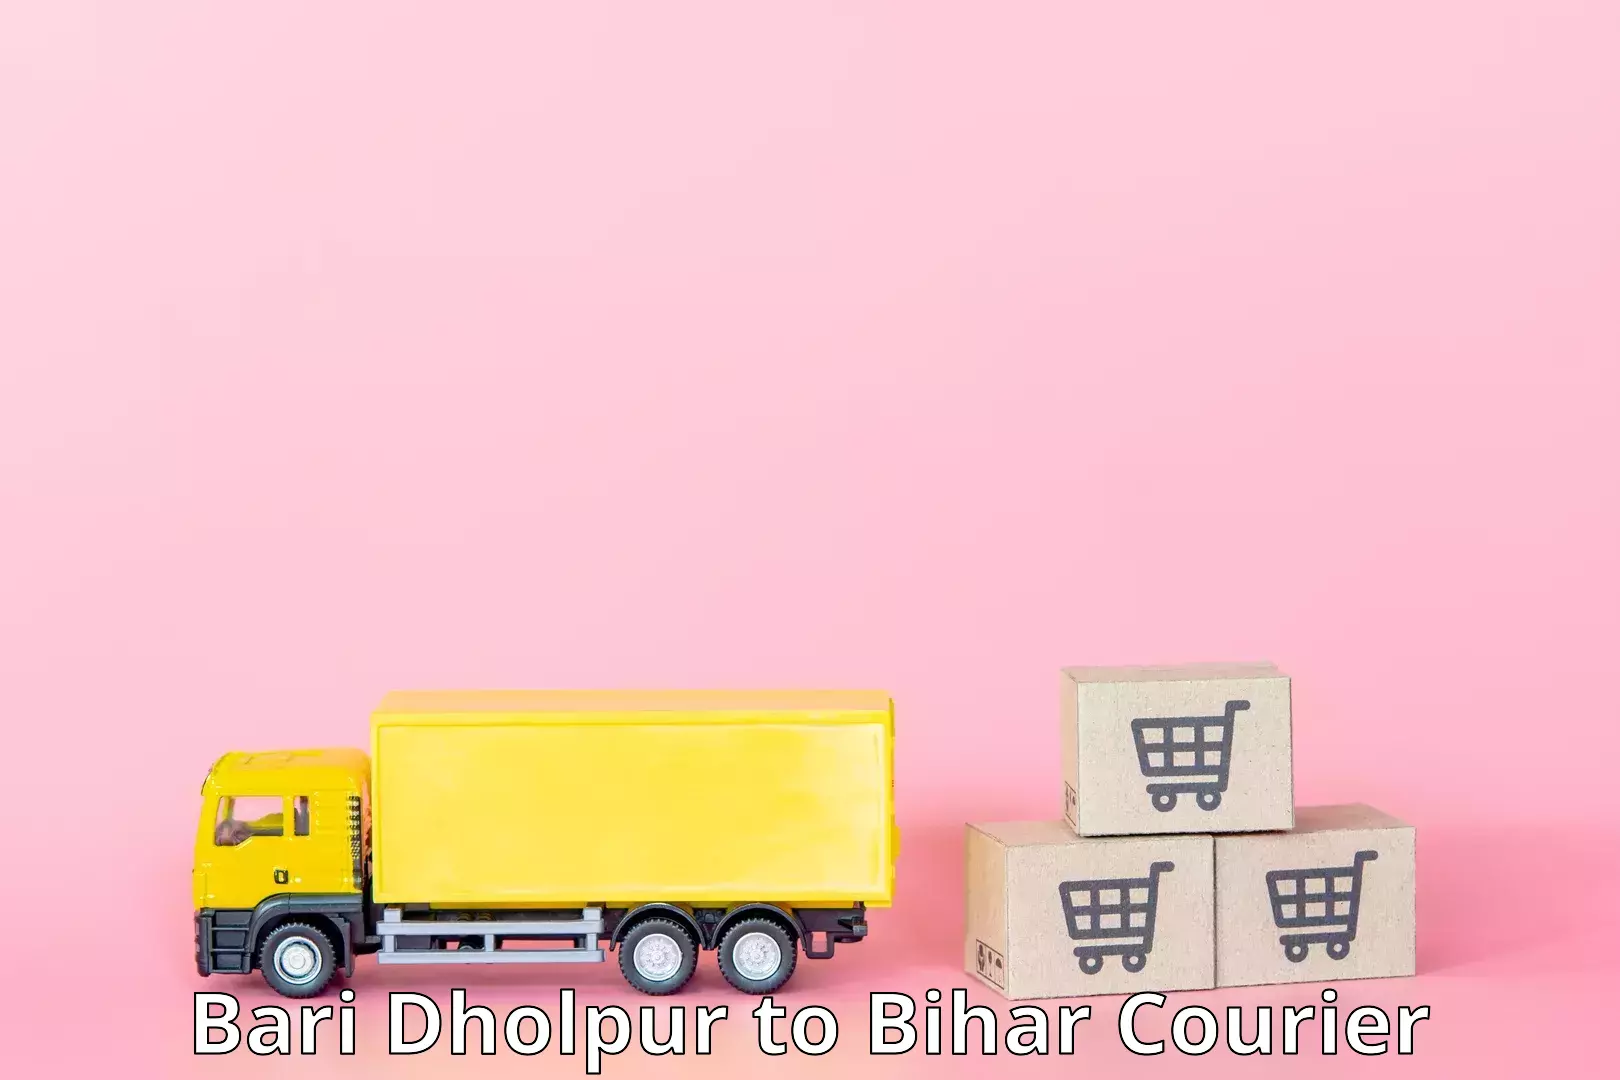 Reliable delivery network Bari Dholpur to Bihar